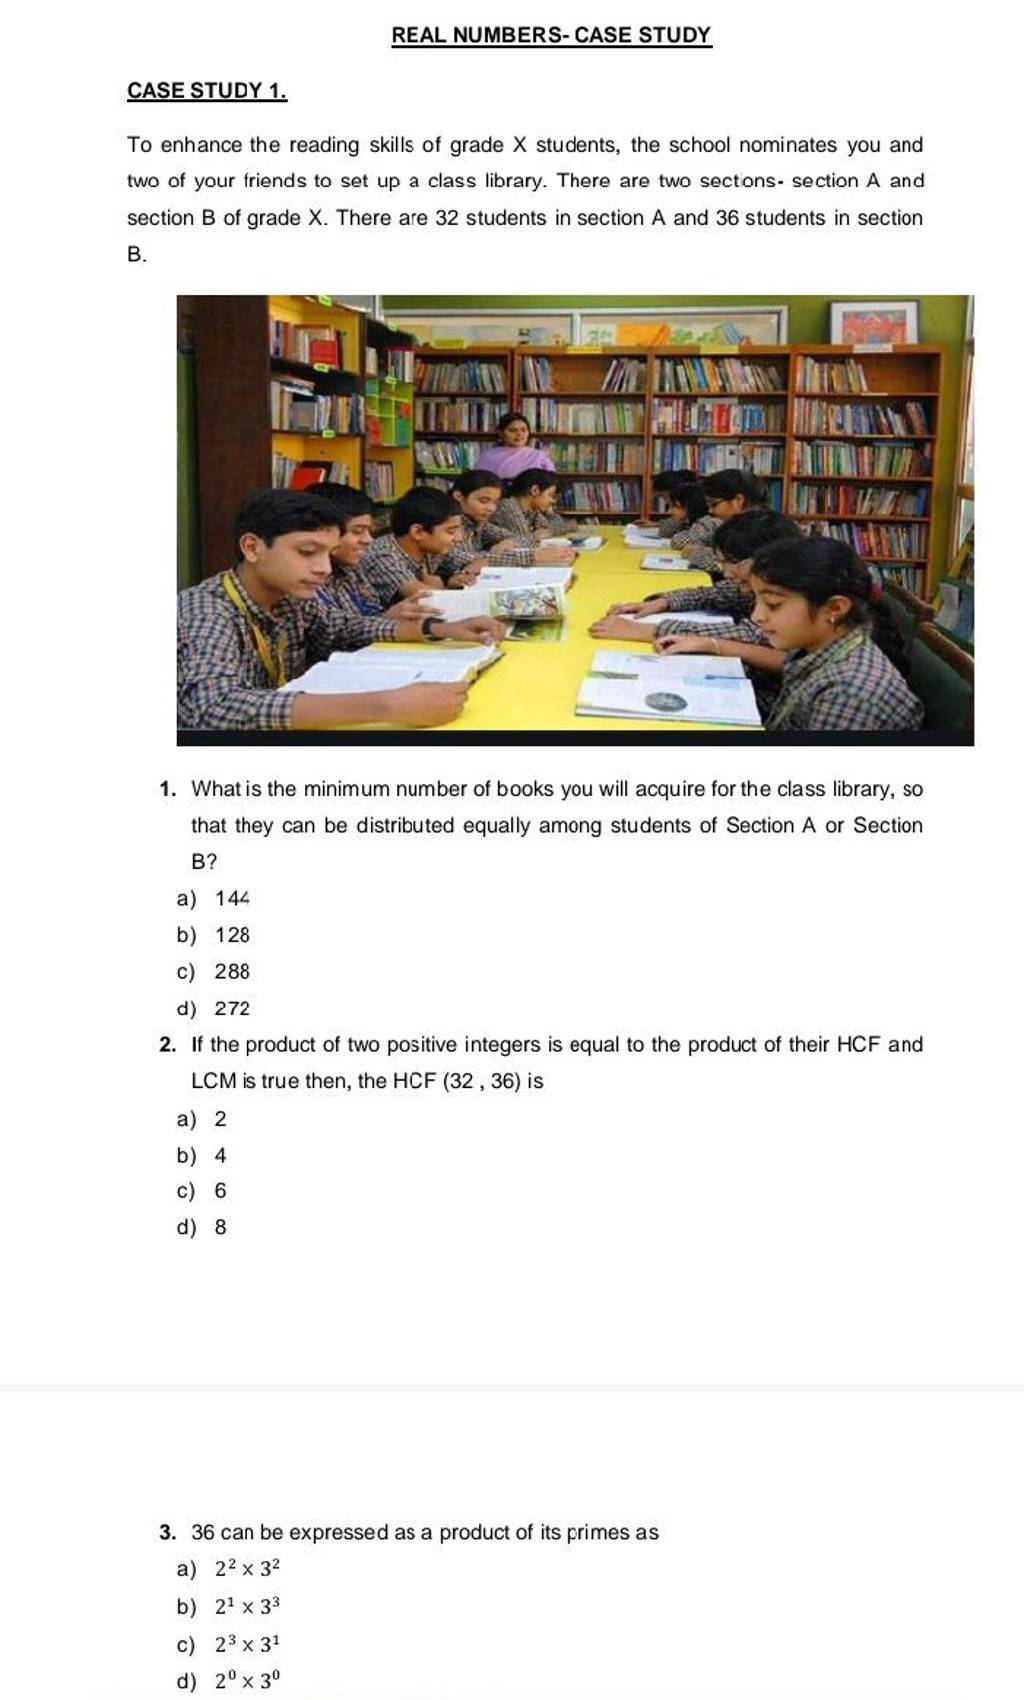 case study for real numbers class 10